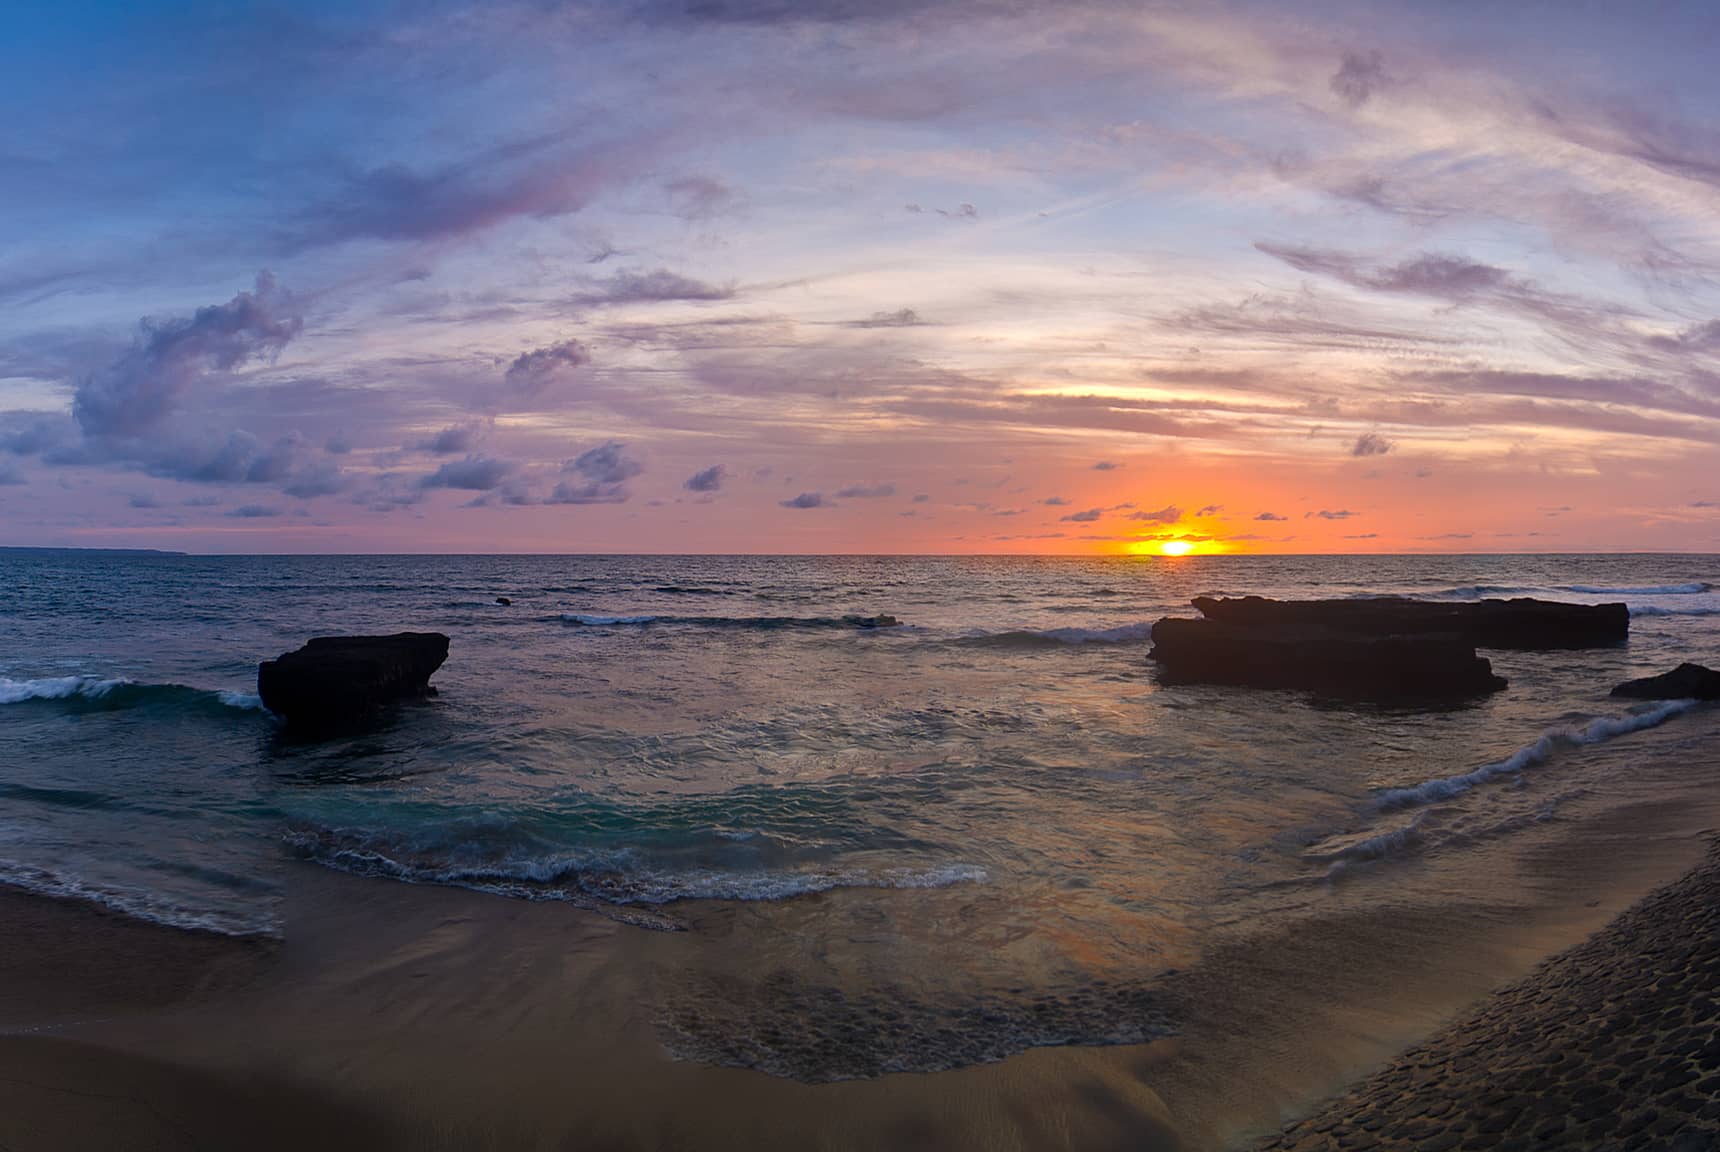 Professional photos of sunsets in Bali Indonesia - Echo Beach